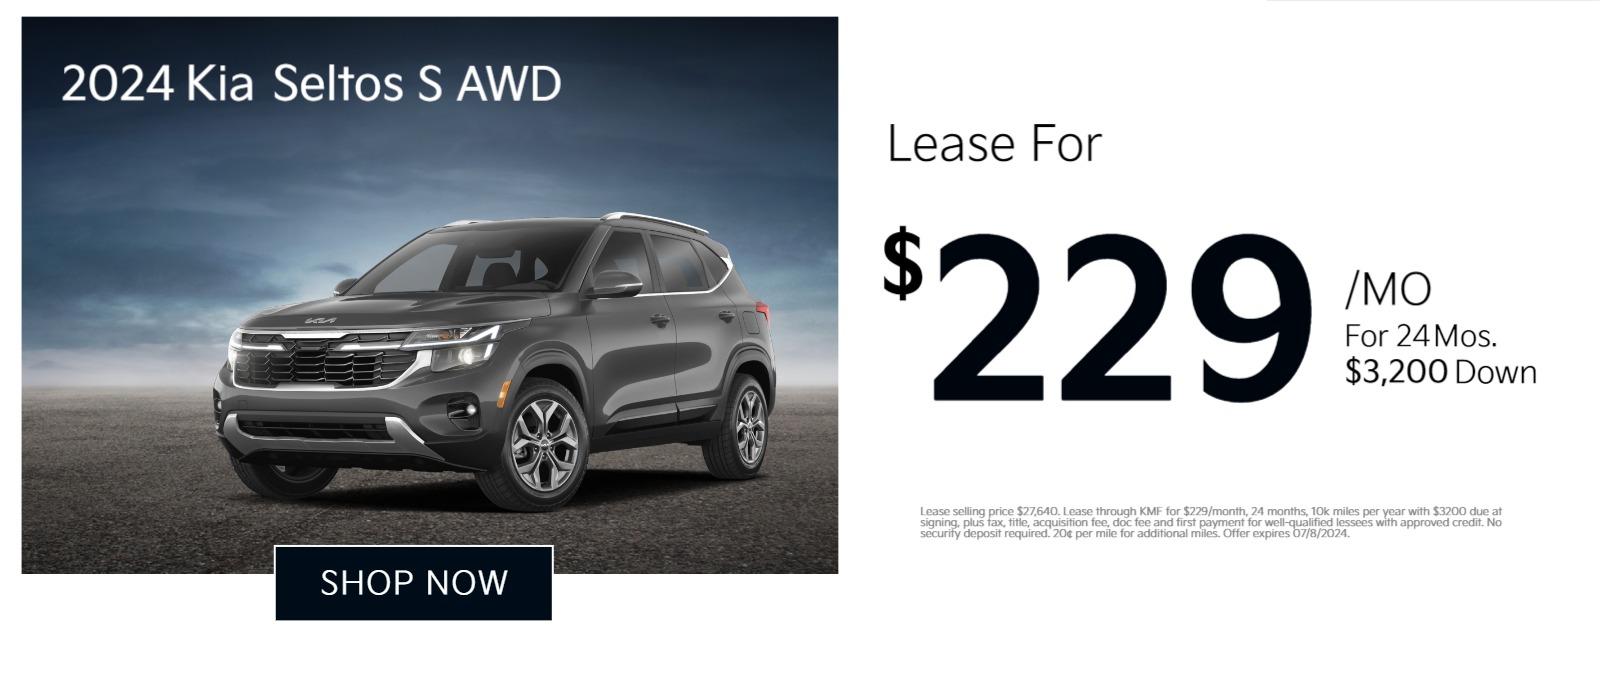 2024 Kia Seltos S AWD
Lease for
$229/mo
For 24 Months. $3,200 Down